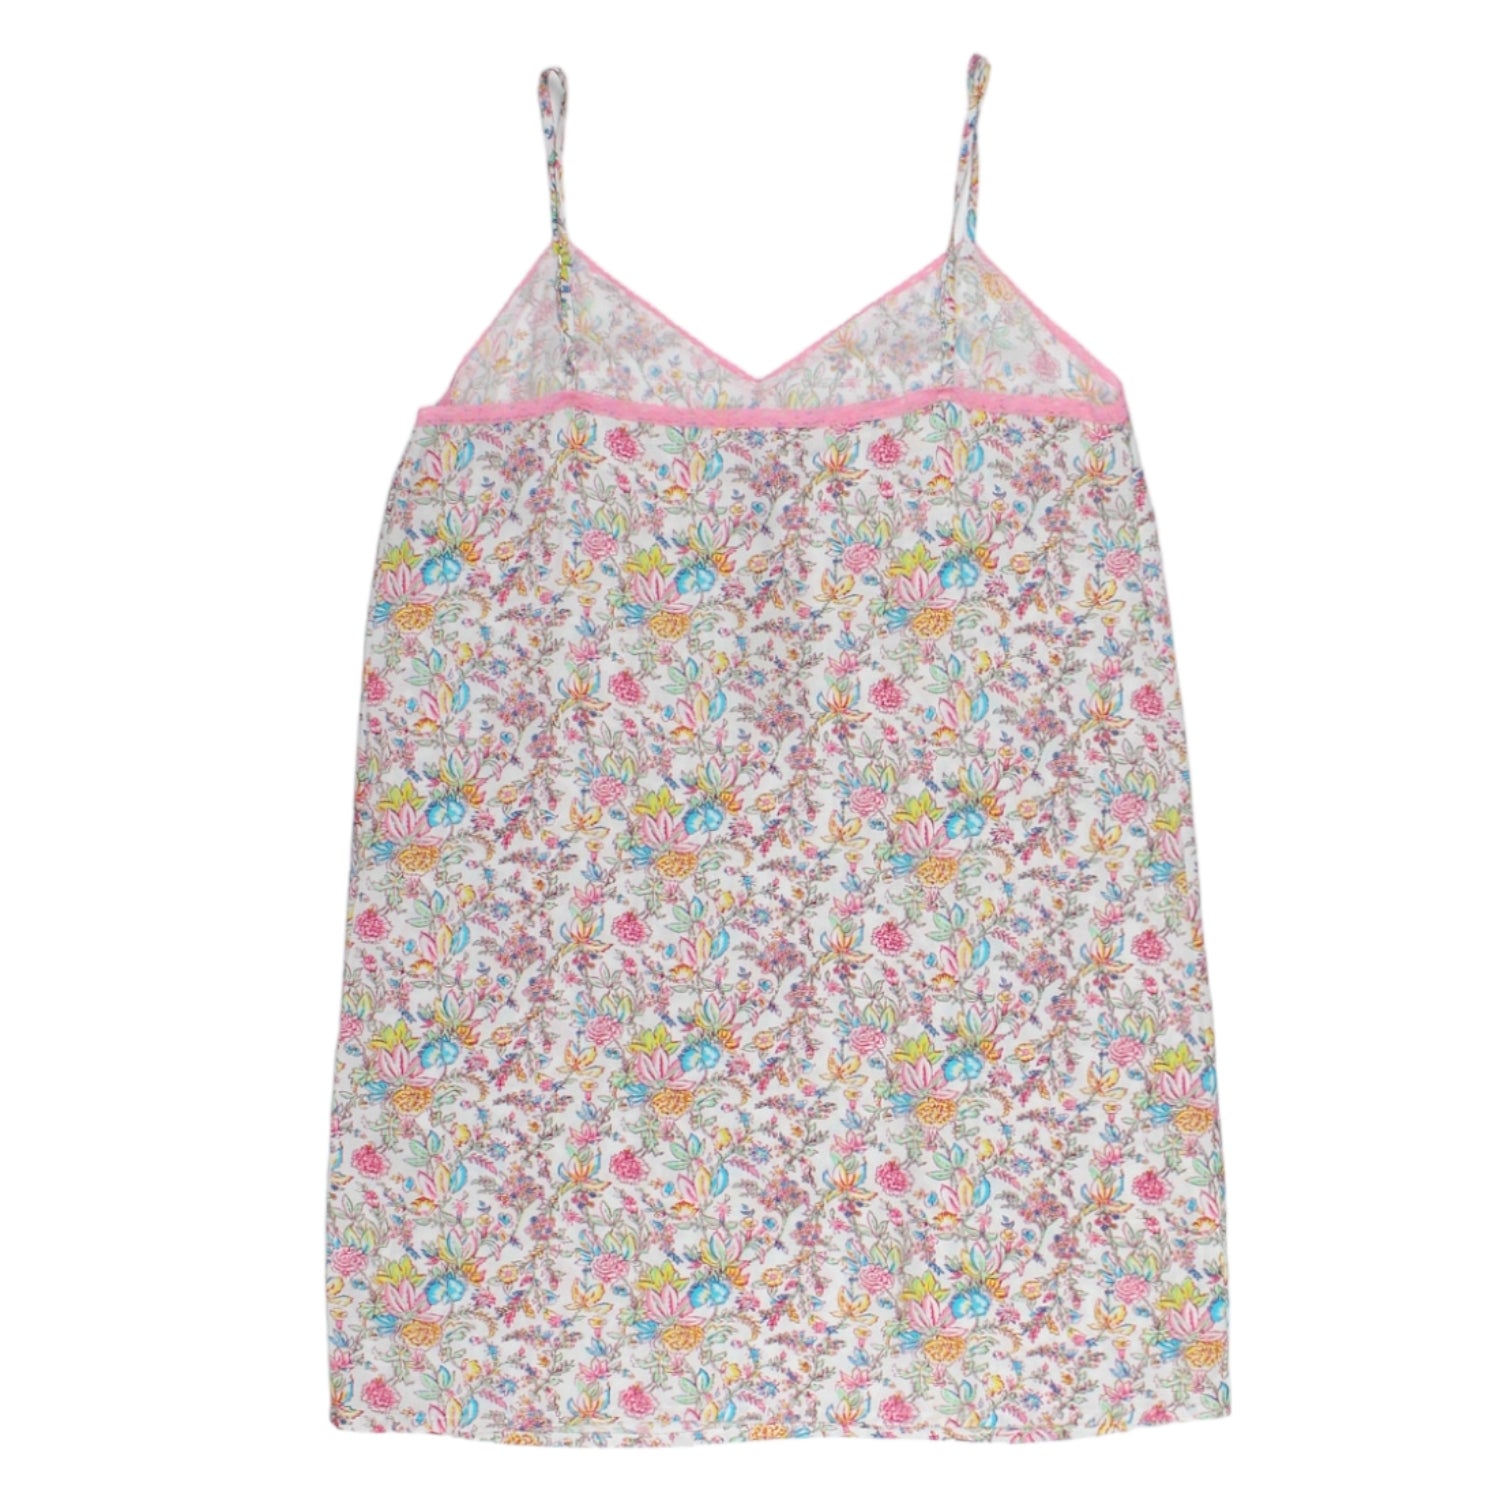 Hush Pink Floral Marie Chemise Nightdress